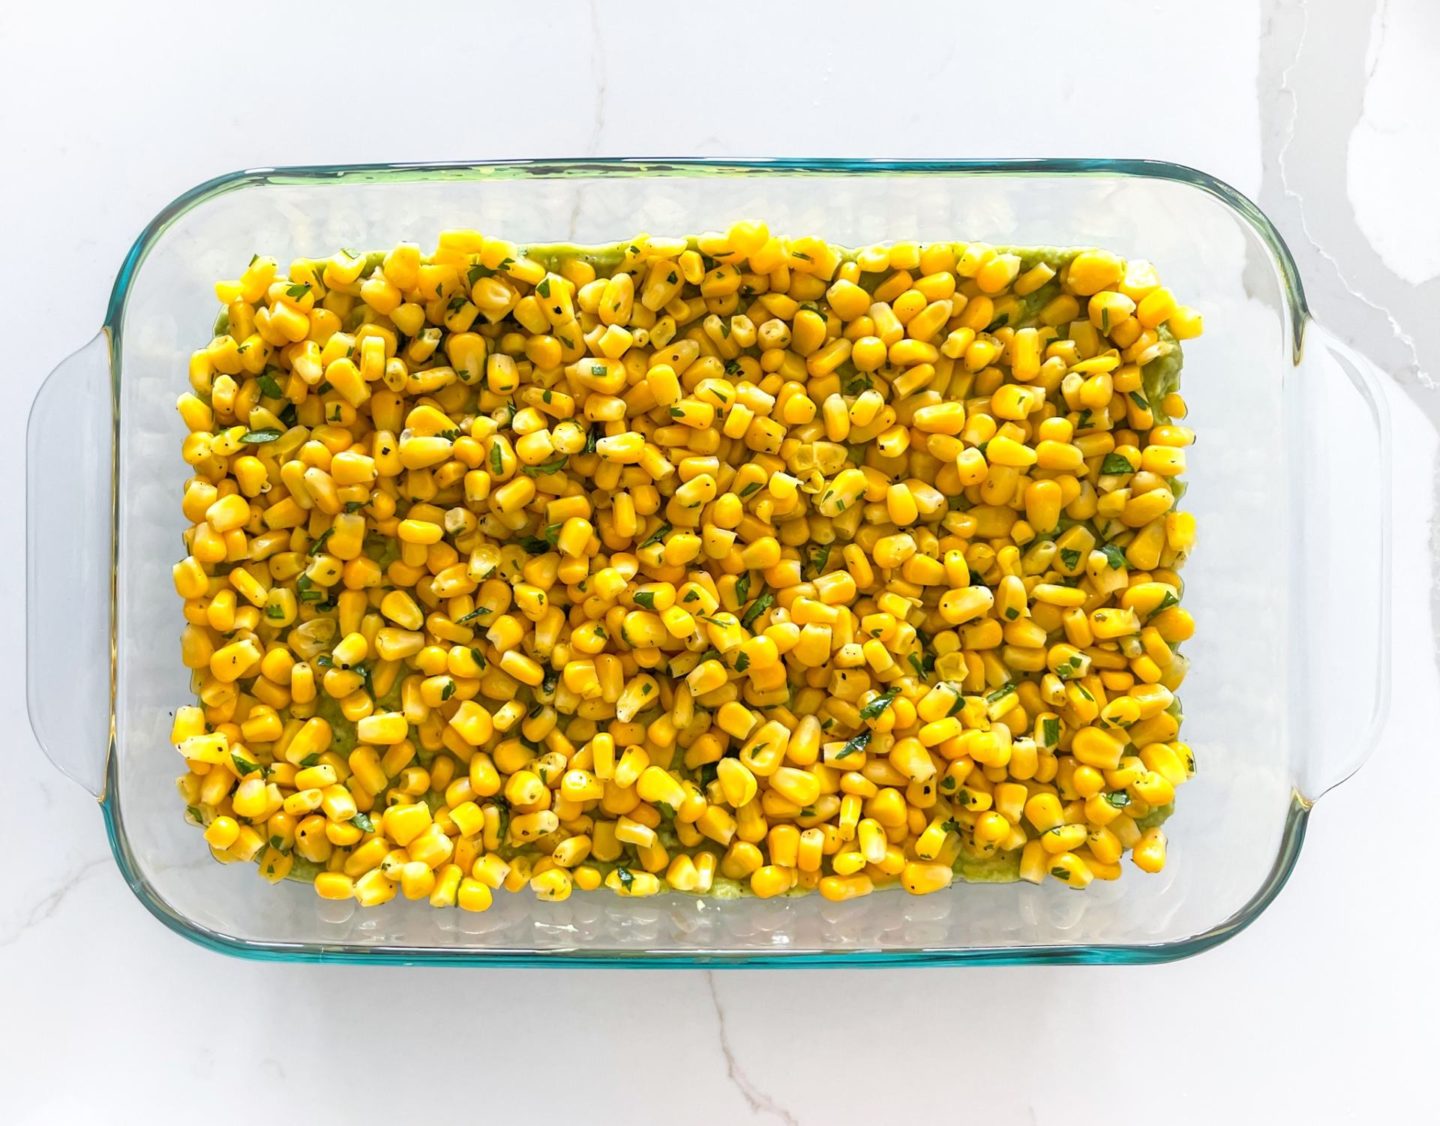 corn in a glass dish on a white counter